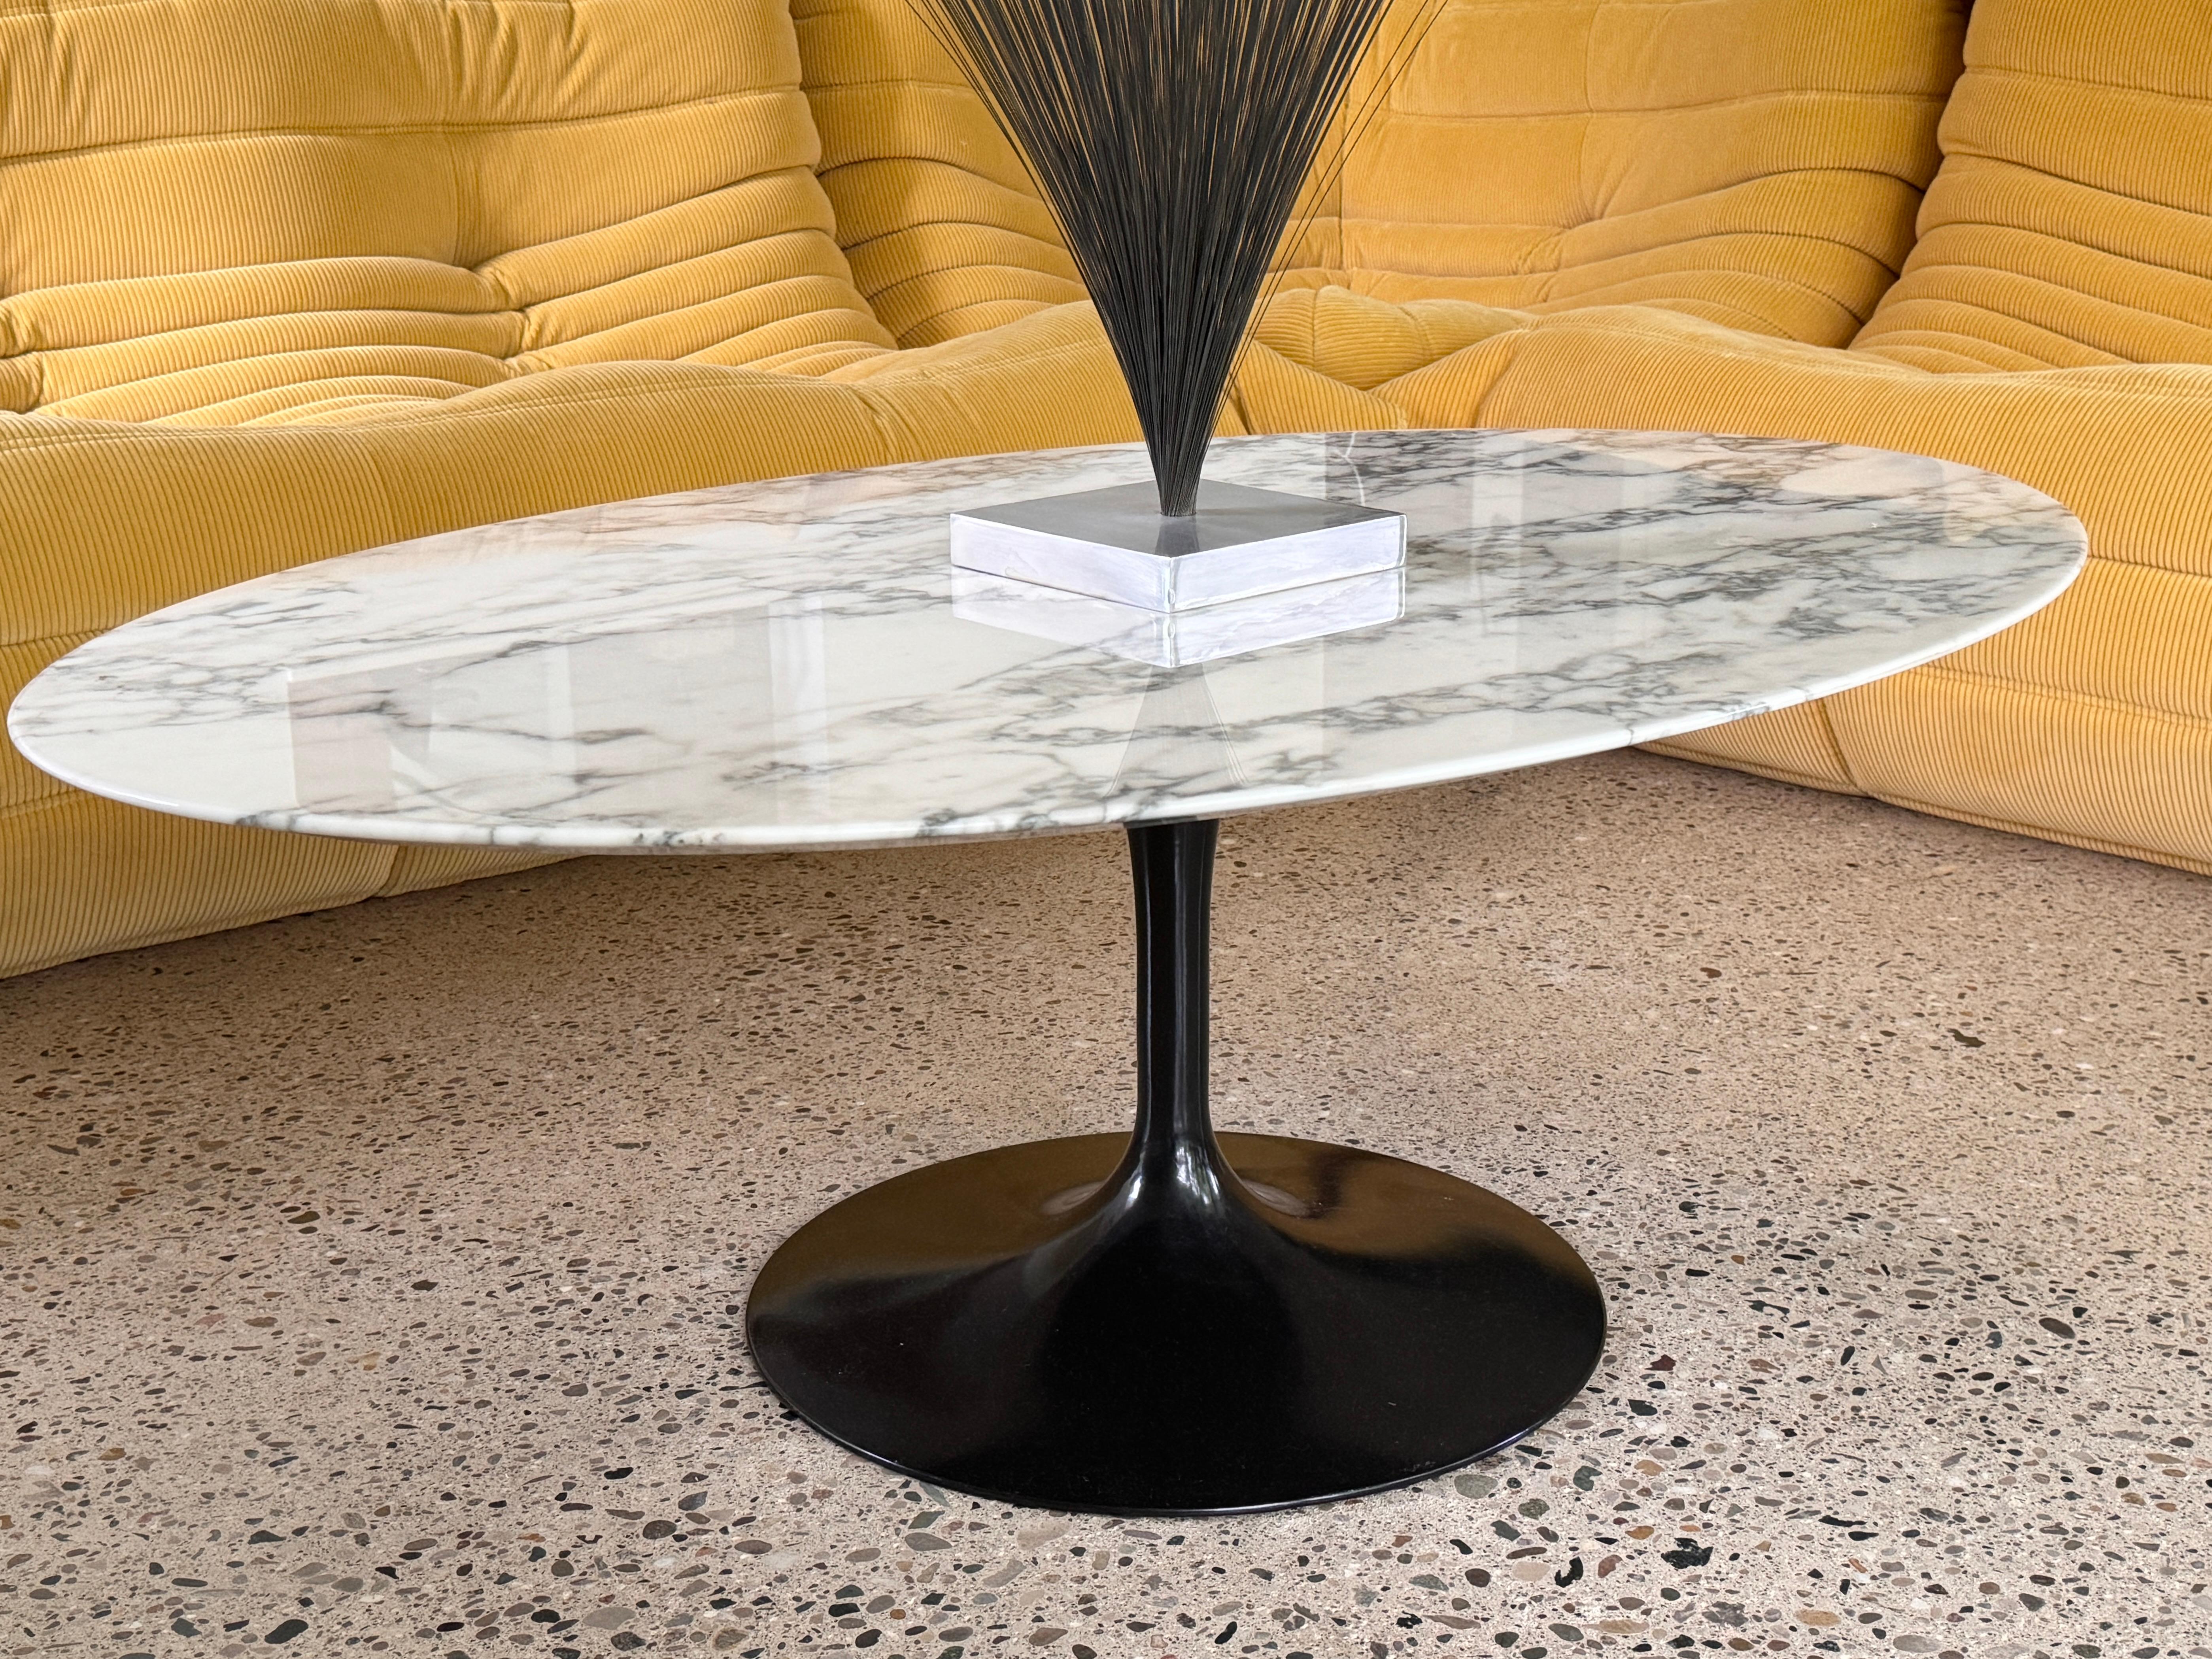 Iconic oval tulip coffee table designed by Eero Saarinen for Knoll in 1957

Sharp example in Arabescato with black tulip base
Labeled to underside

42 inch width
28 inch depth 
15 inch height

